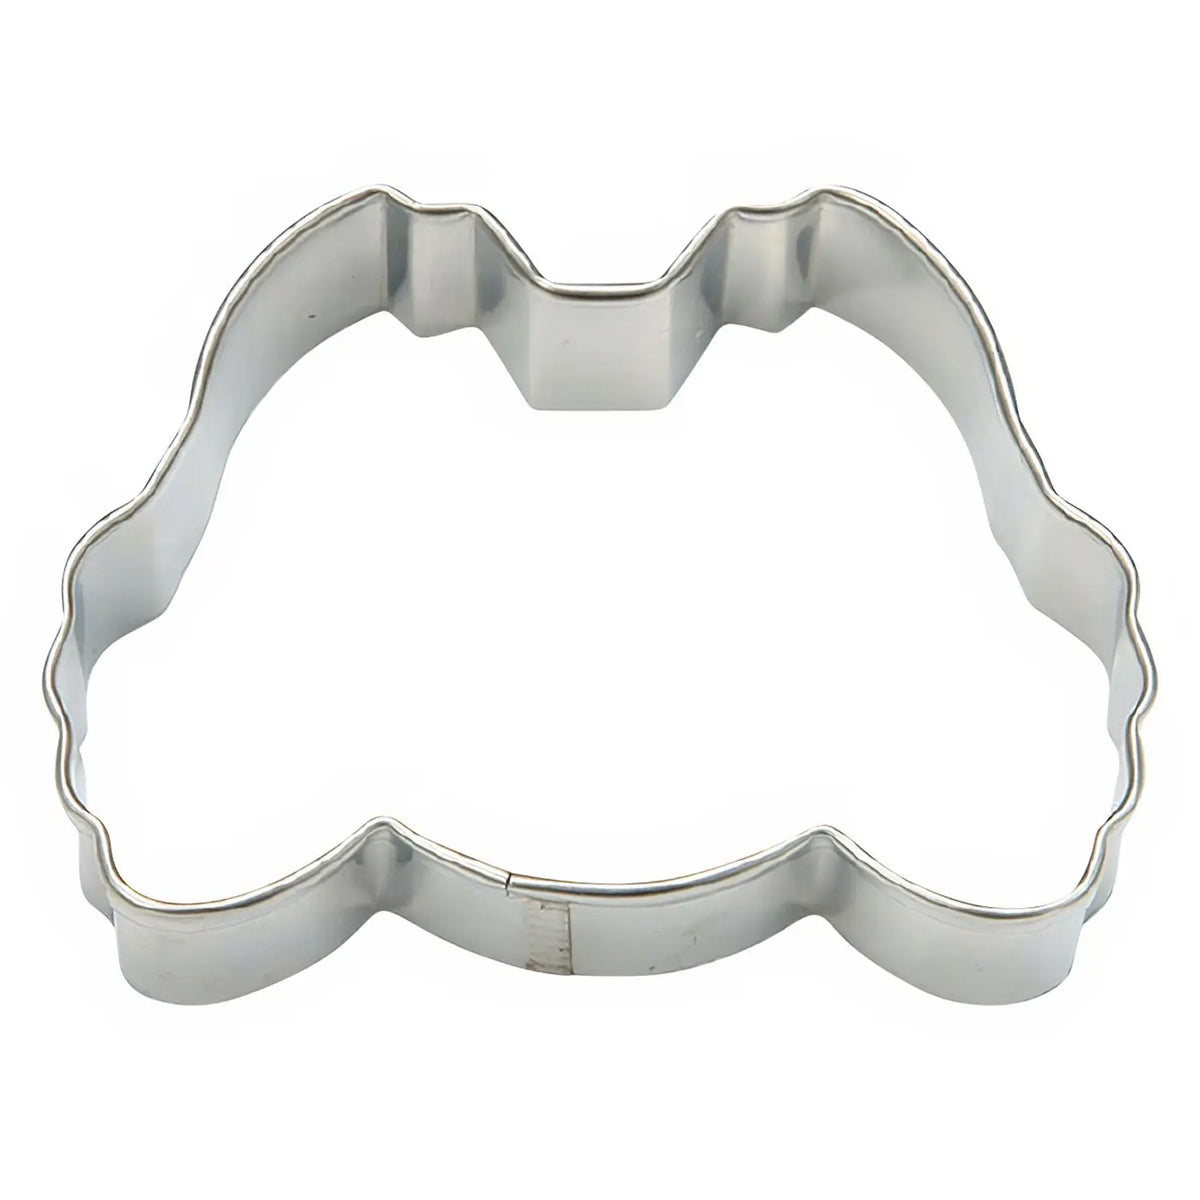 TIGERCROWN Cake Land Stainless Steel Cookie Cutter Crab